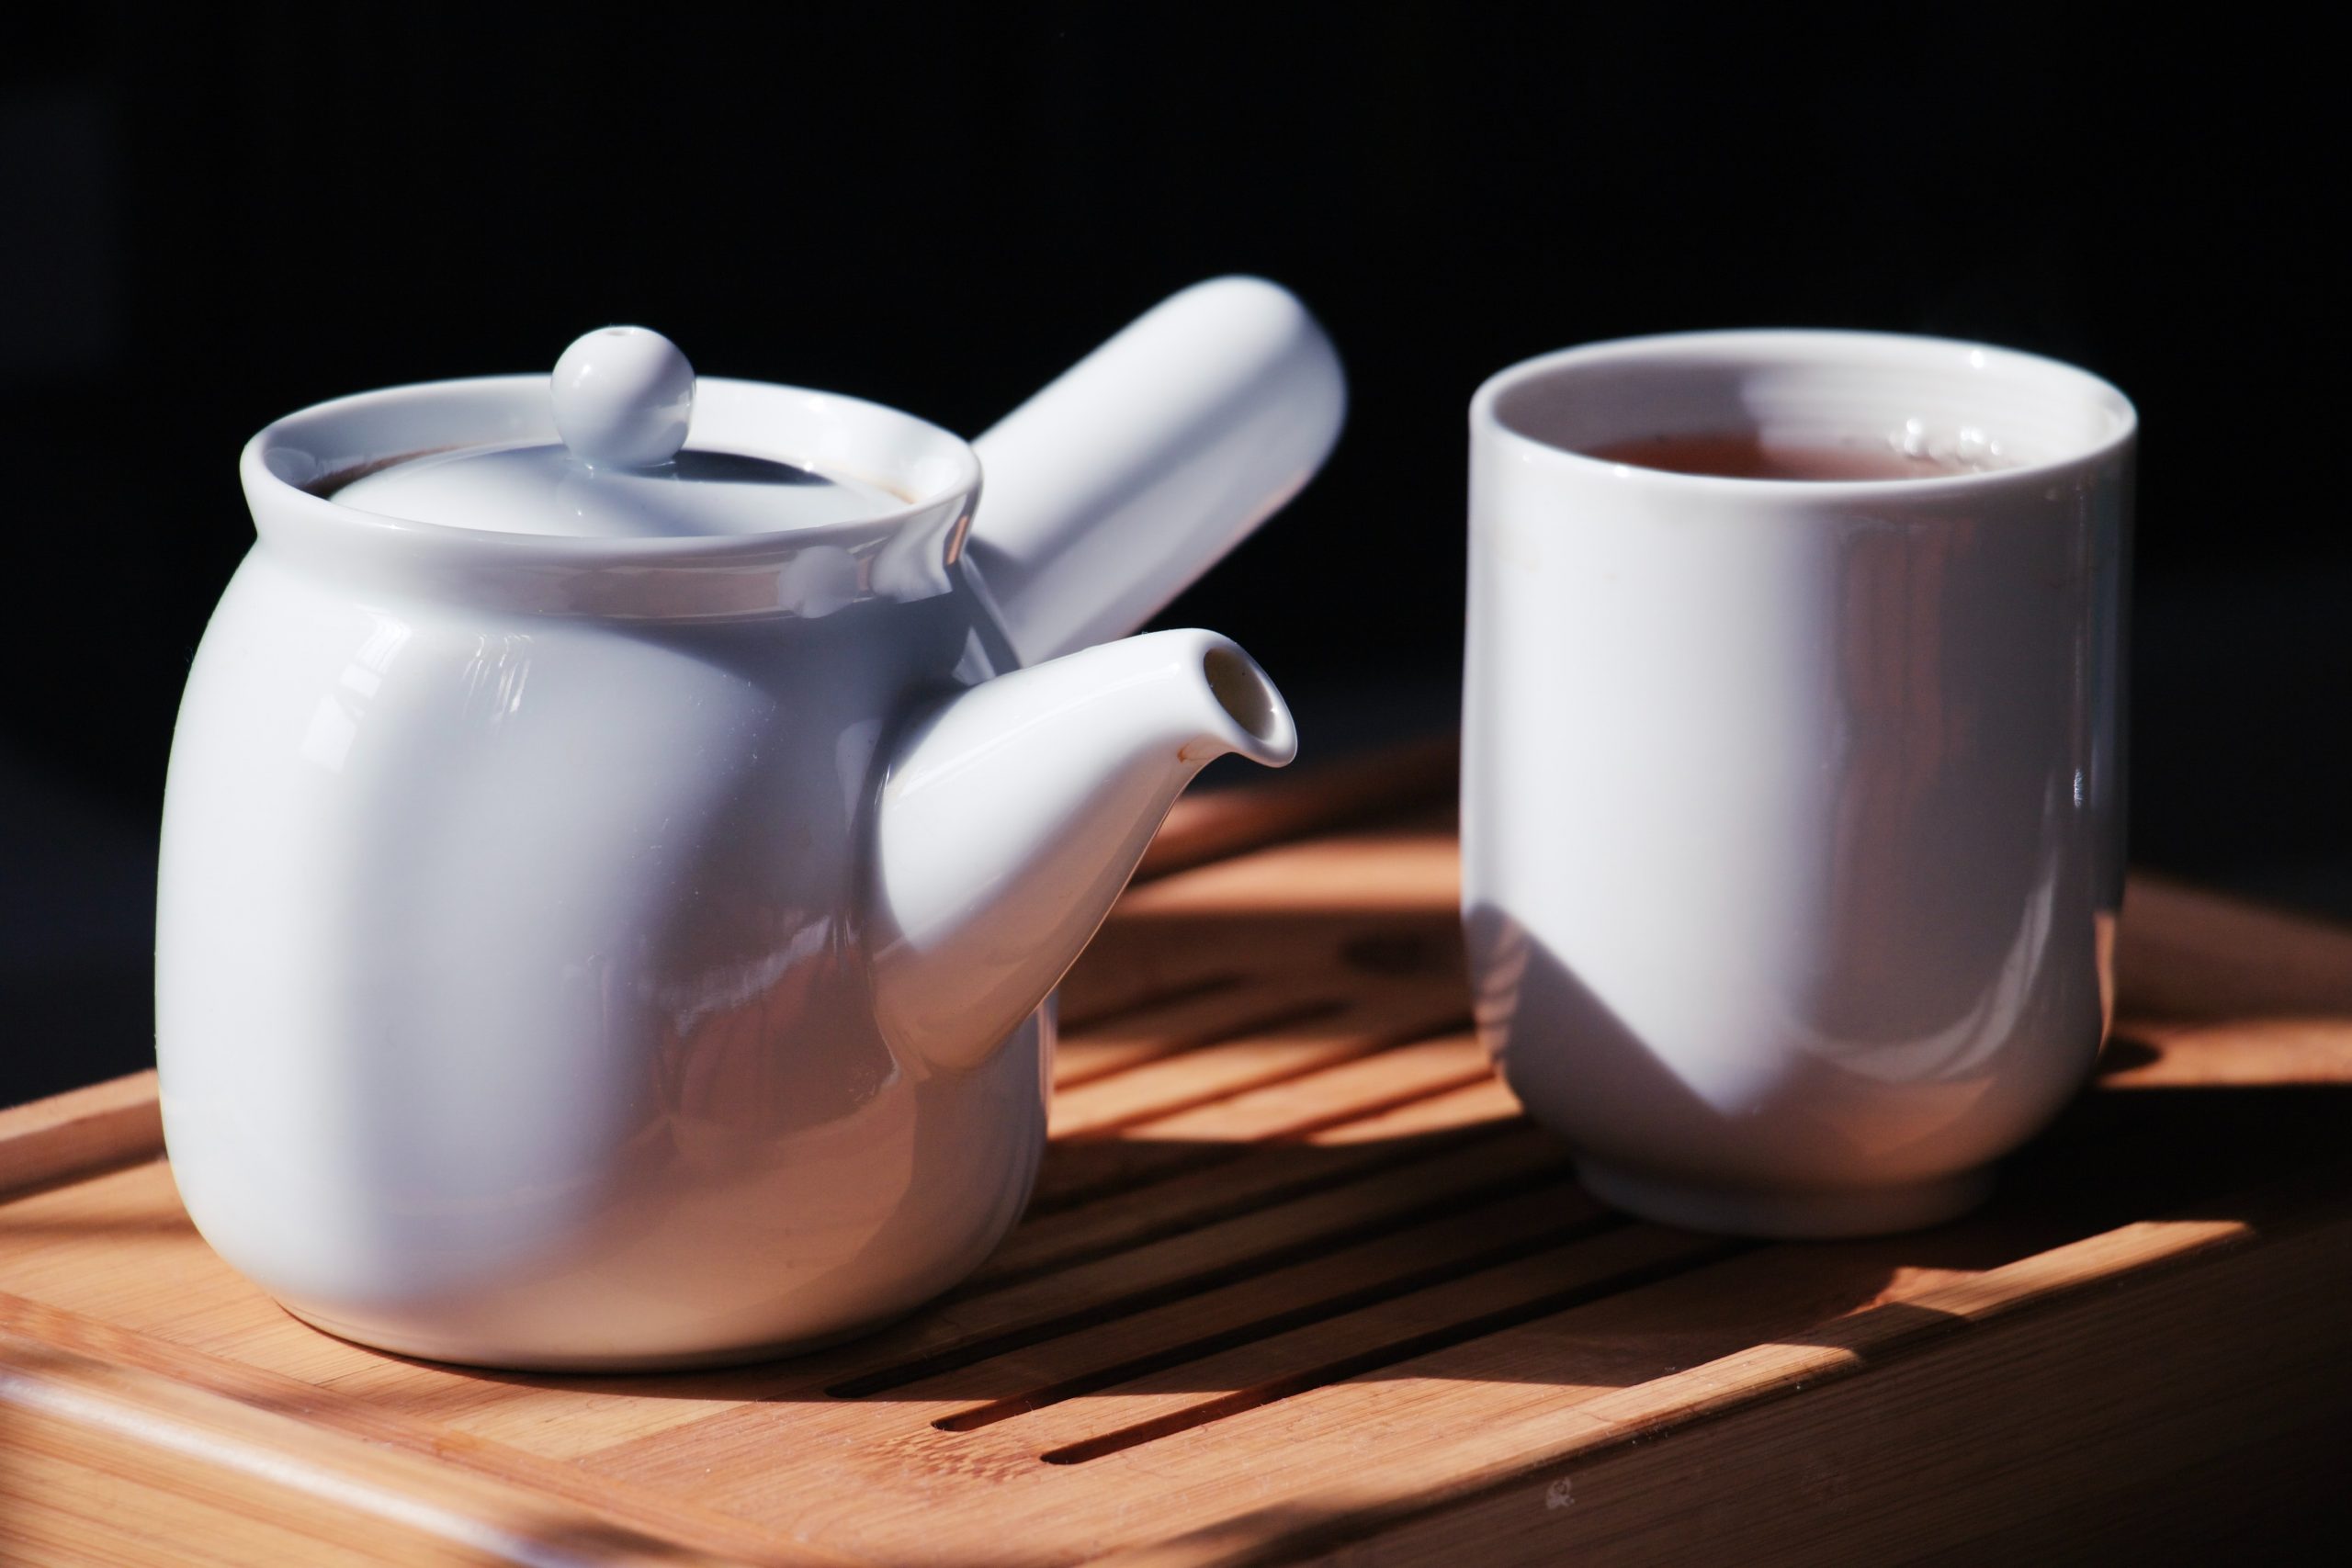 A porcelain teapot and cup filled with tea on a brown surface against a black background